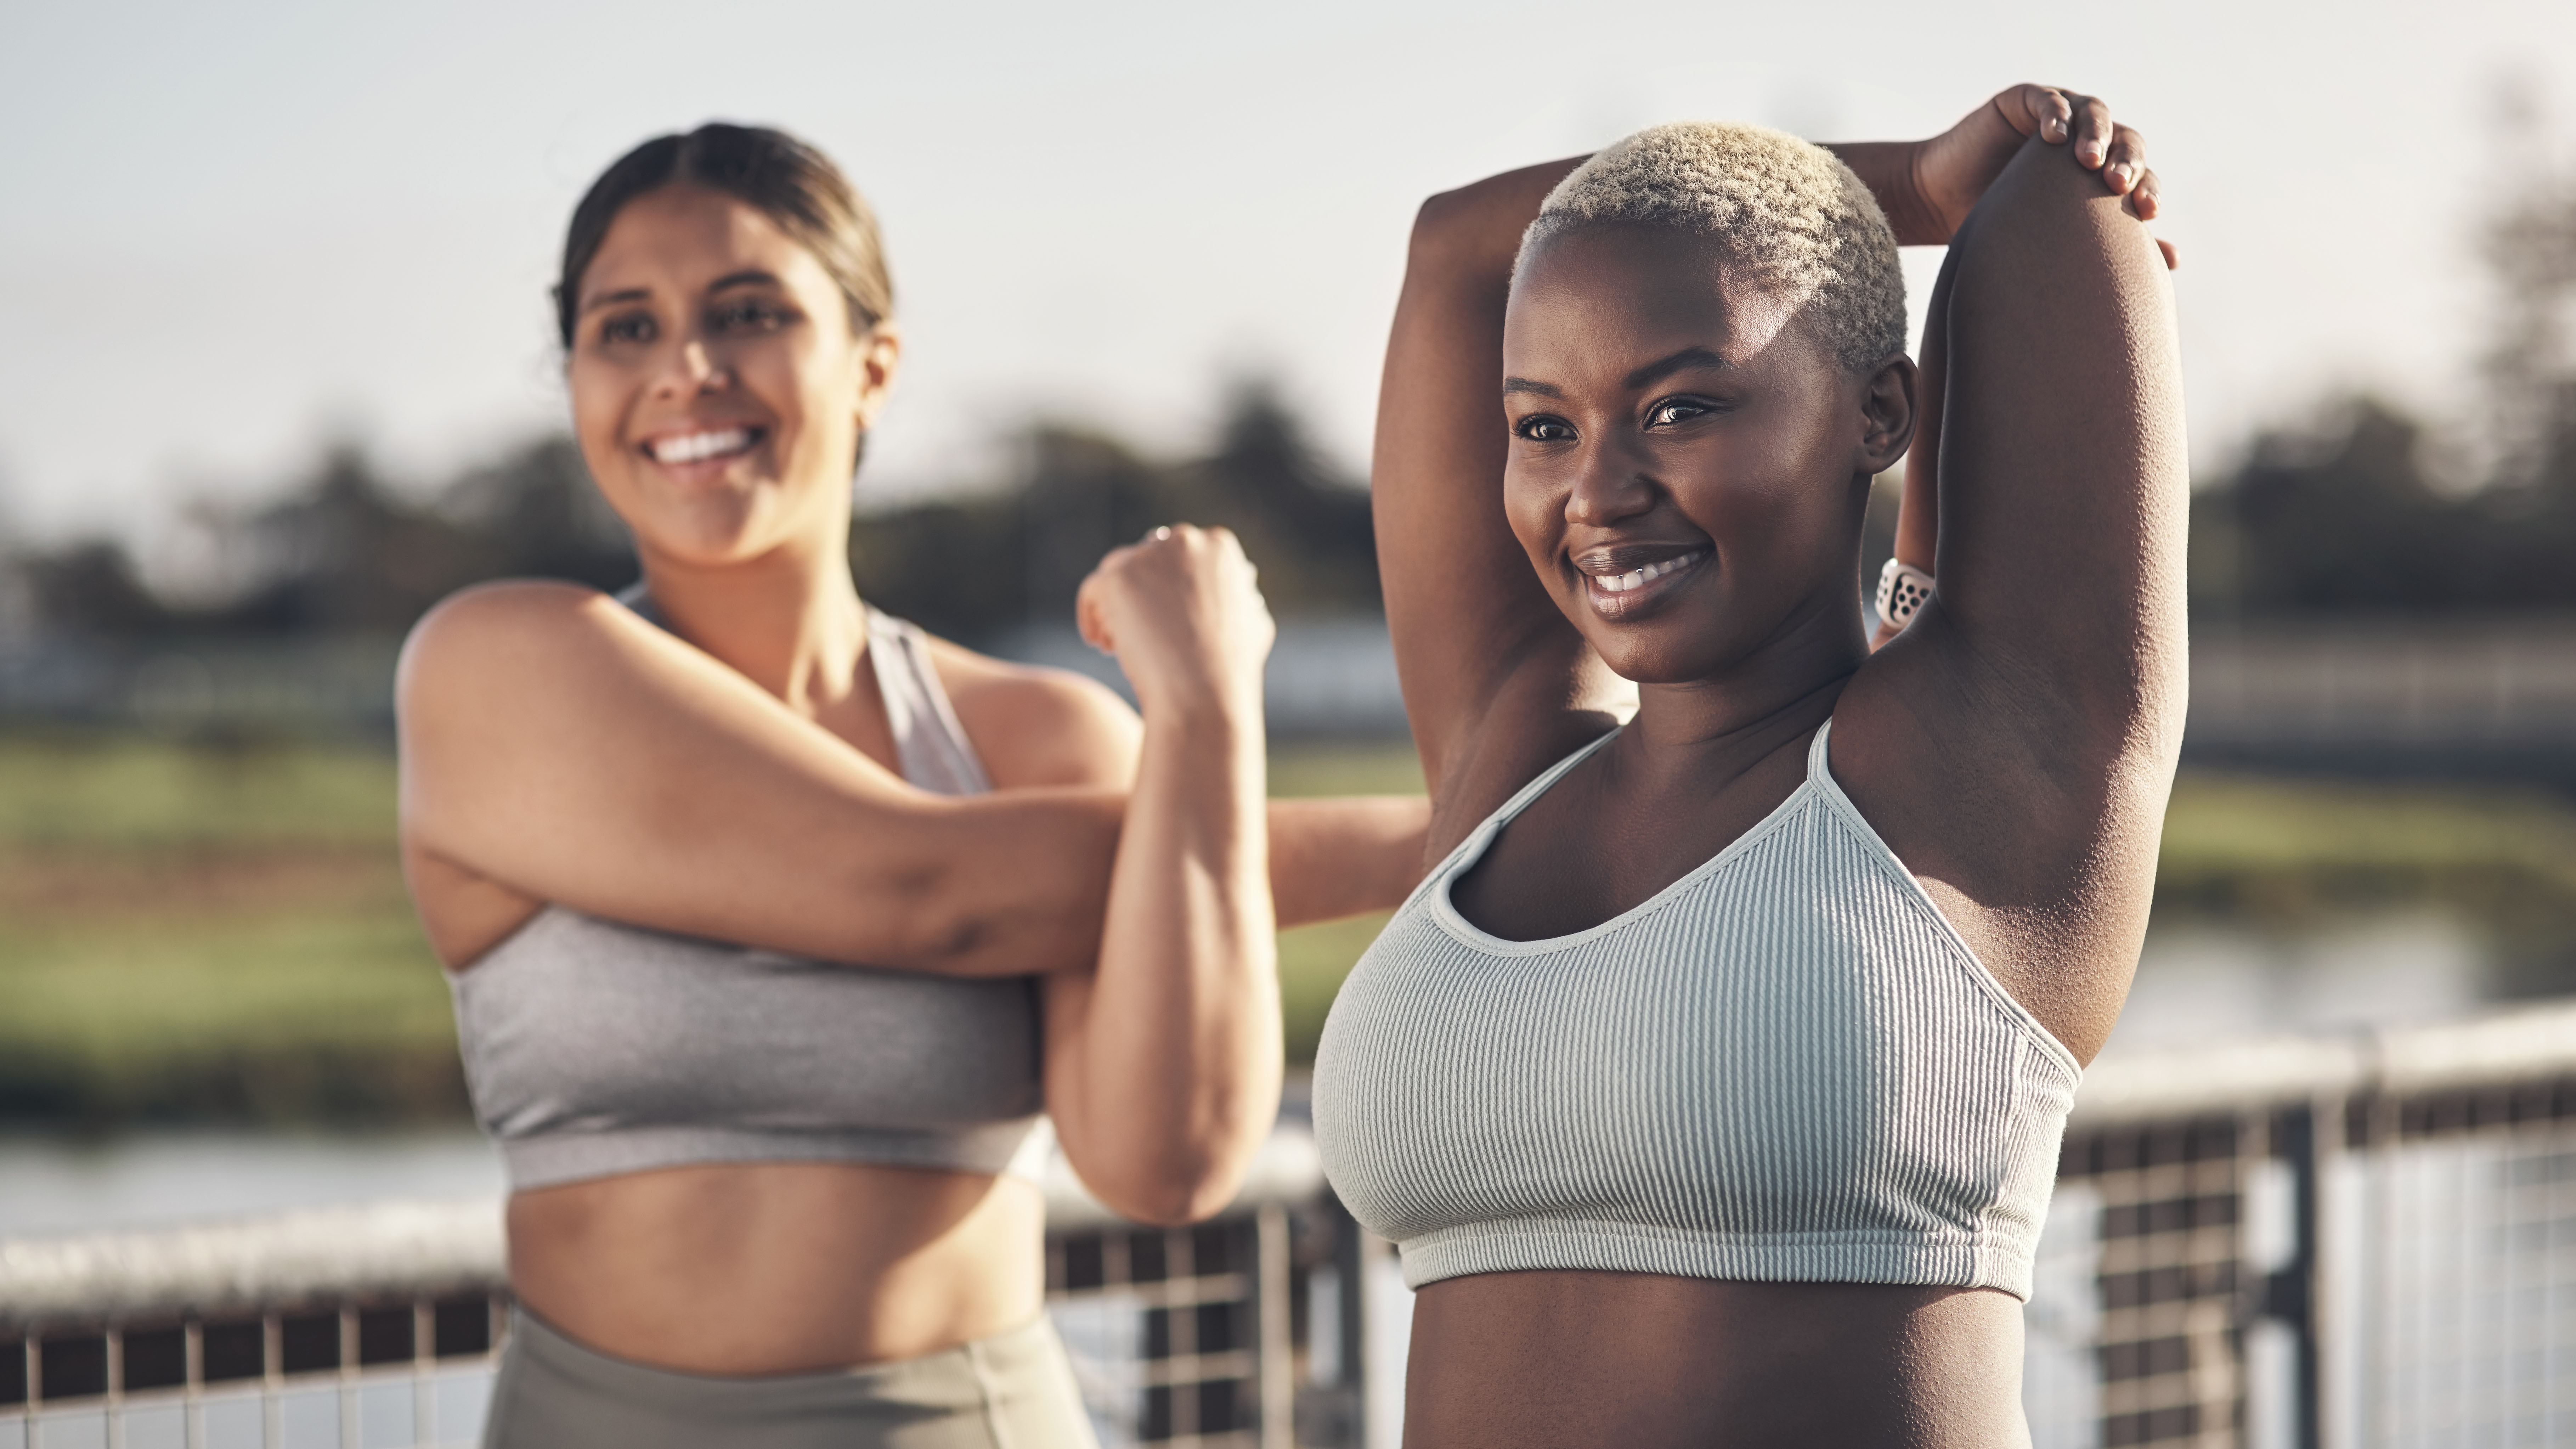 Are sports bras bad for you?